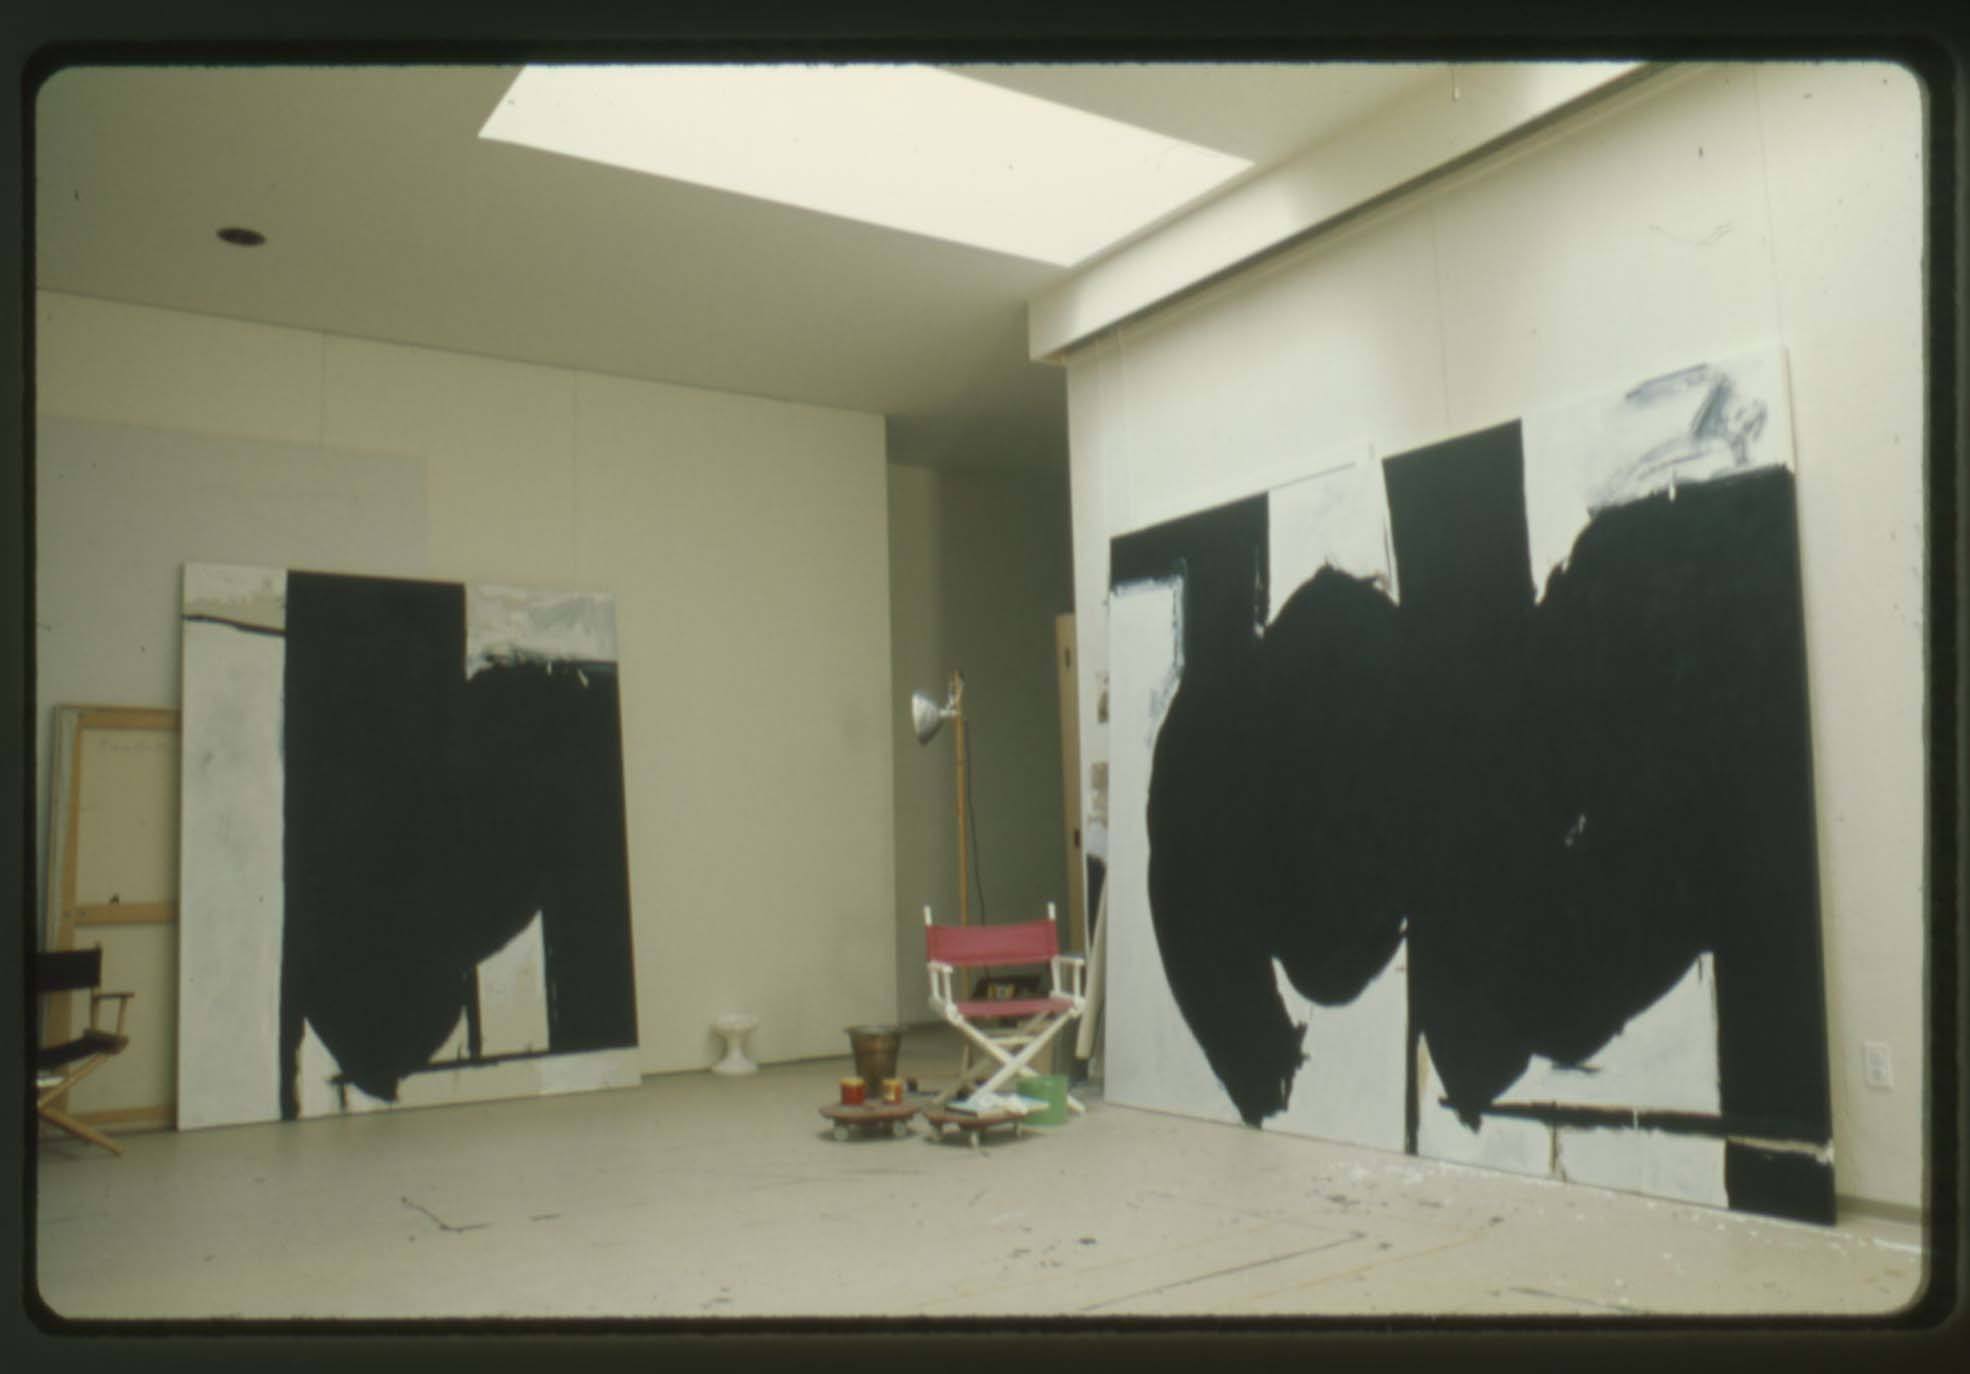 Motherwell’s Greenwich painting studio with The Spanish Death, fall 1975